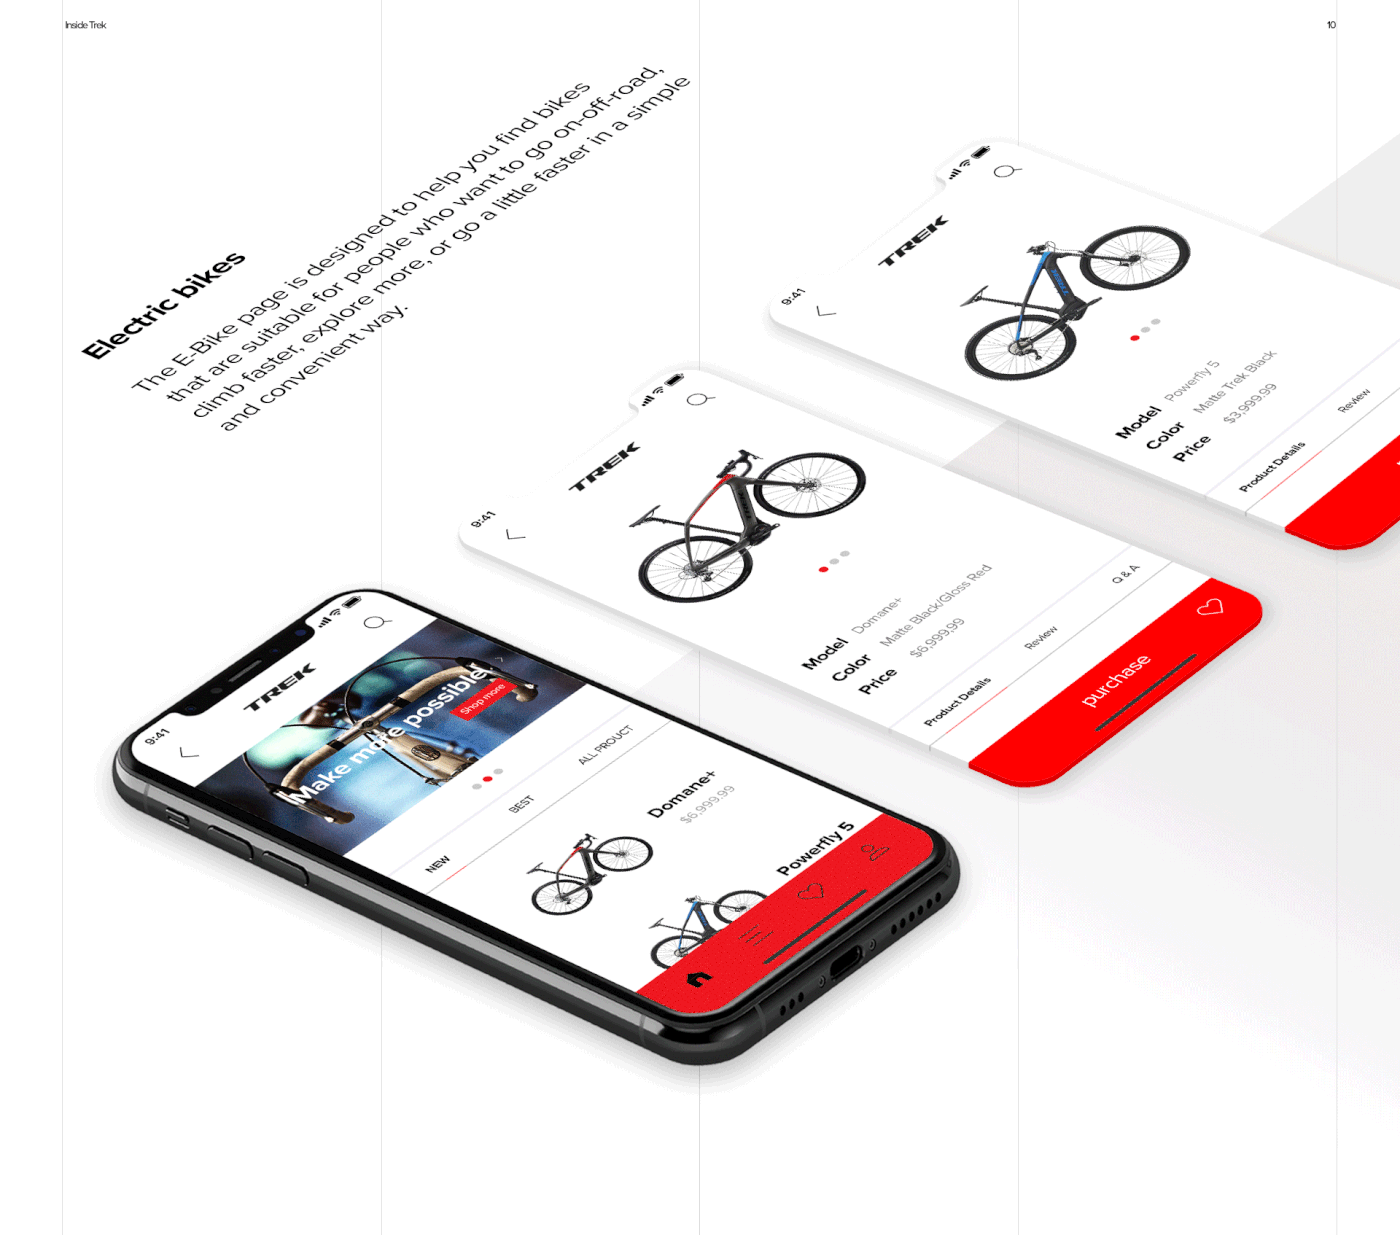 Trek Bike Bicycle interaction uiux Web mobile giant specialized Cervelo